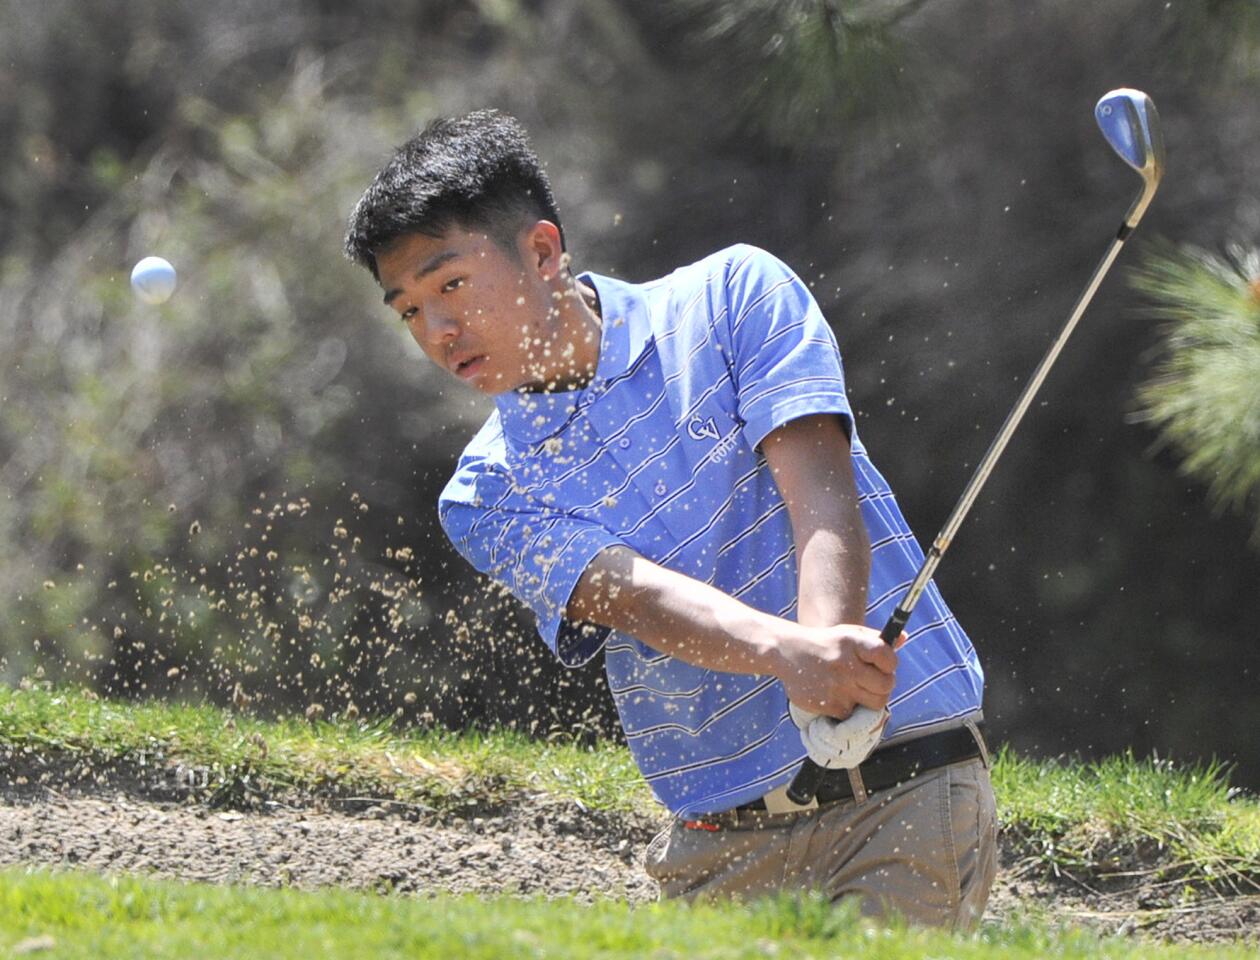 Crescenta Valley's Paul Park hits out of a bunker outside the first green in a Pacific League golf match at De Bell Golf Club in Burbank on Thursday, March 13, 2014.